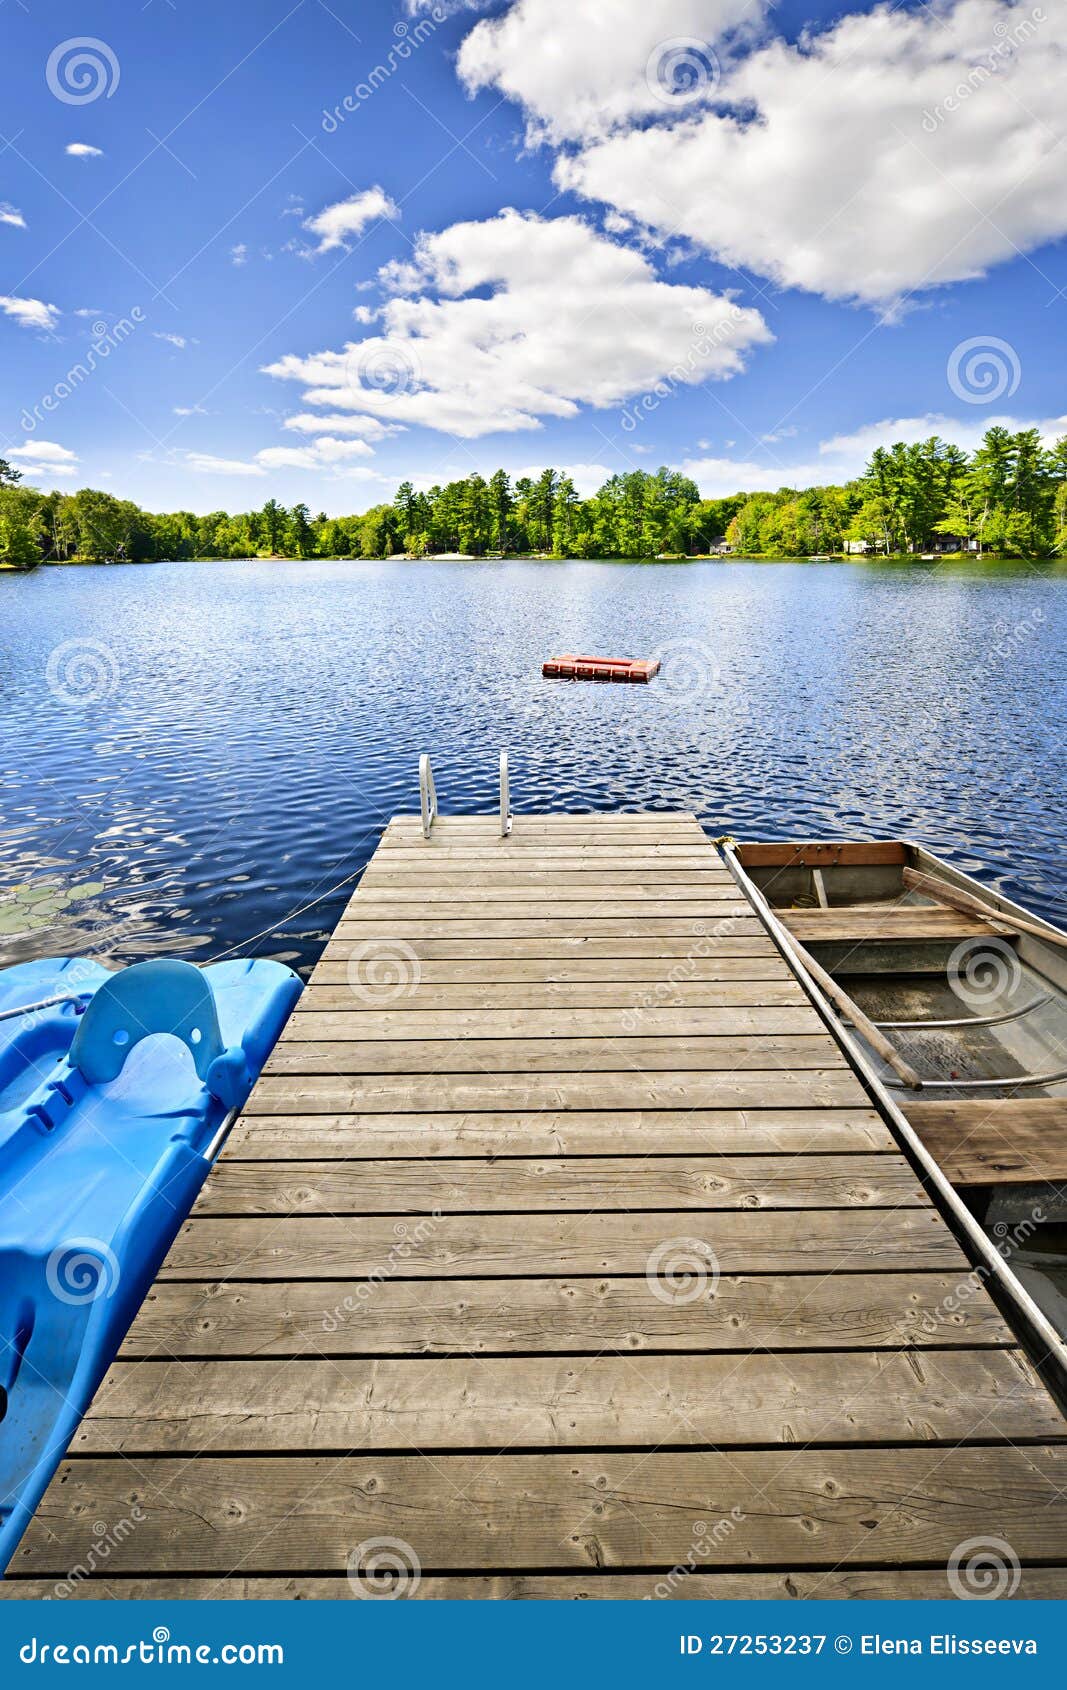 dock on lake in summer cottage country stock image - image